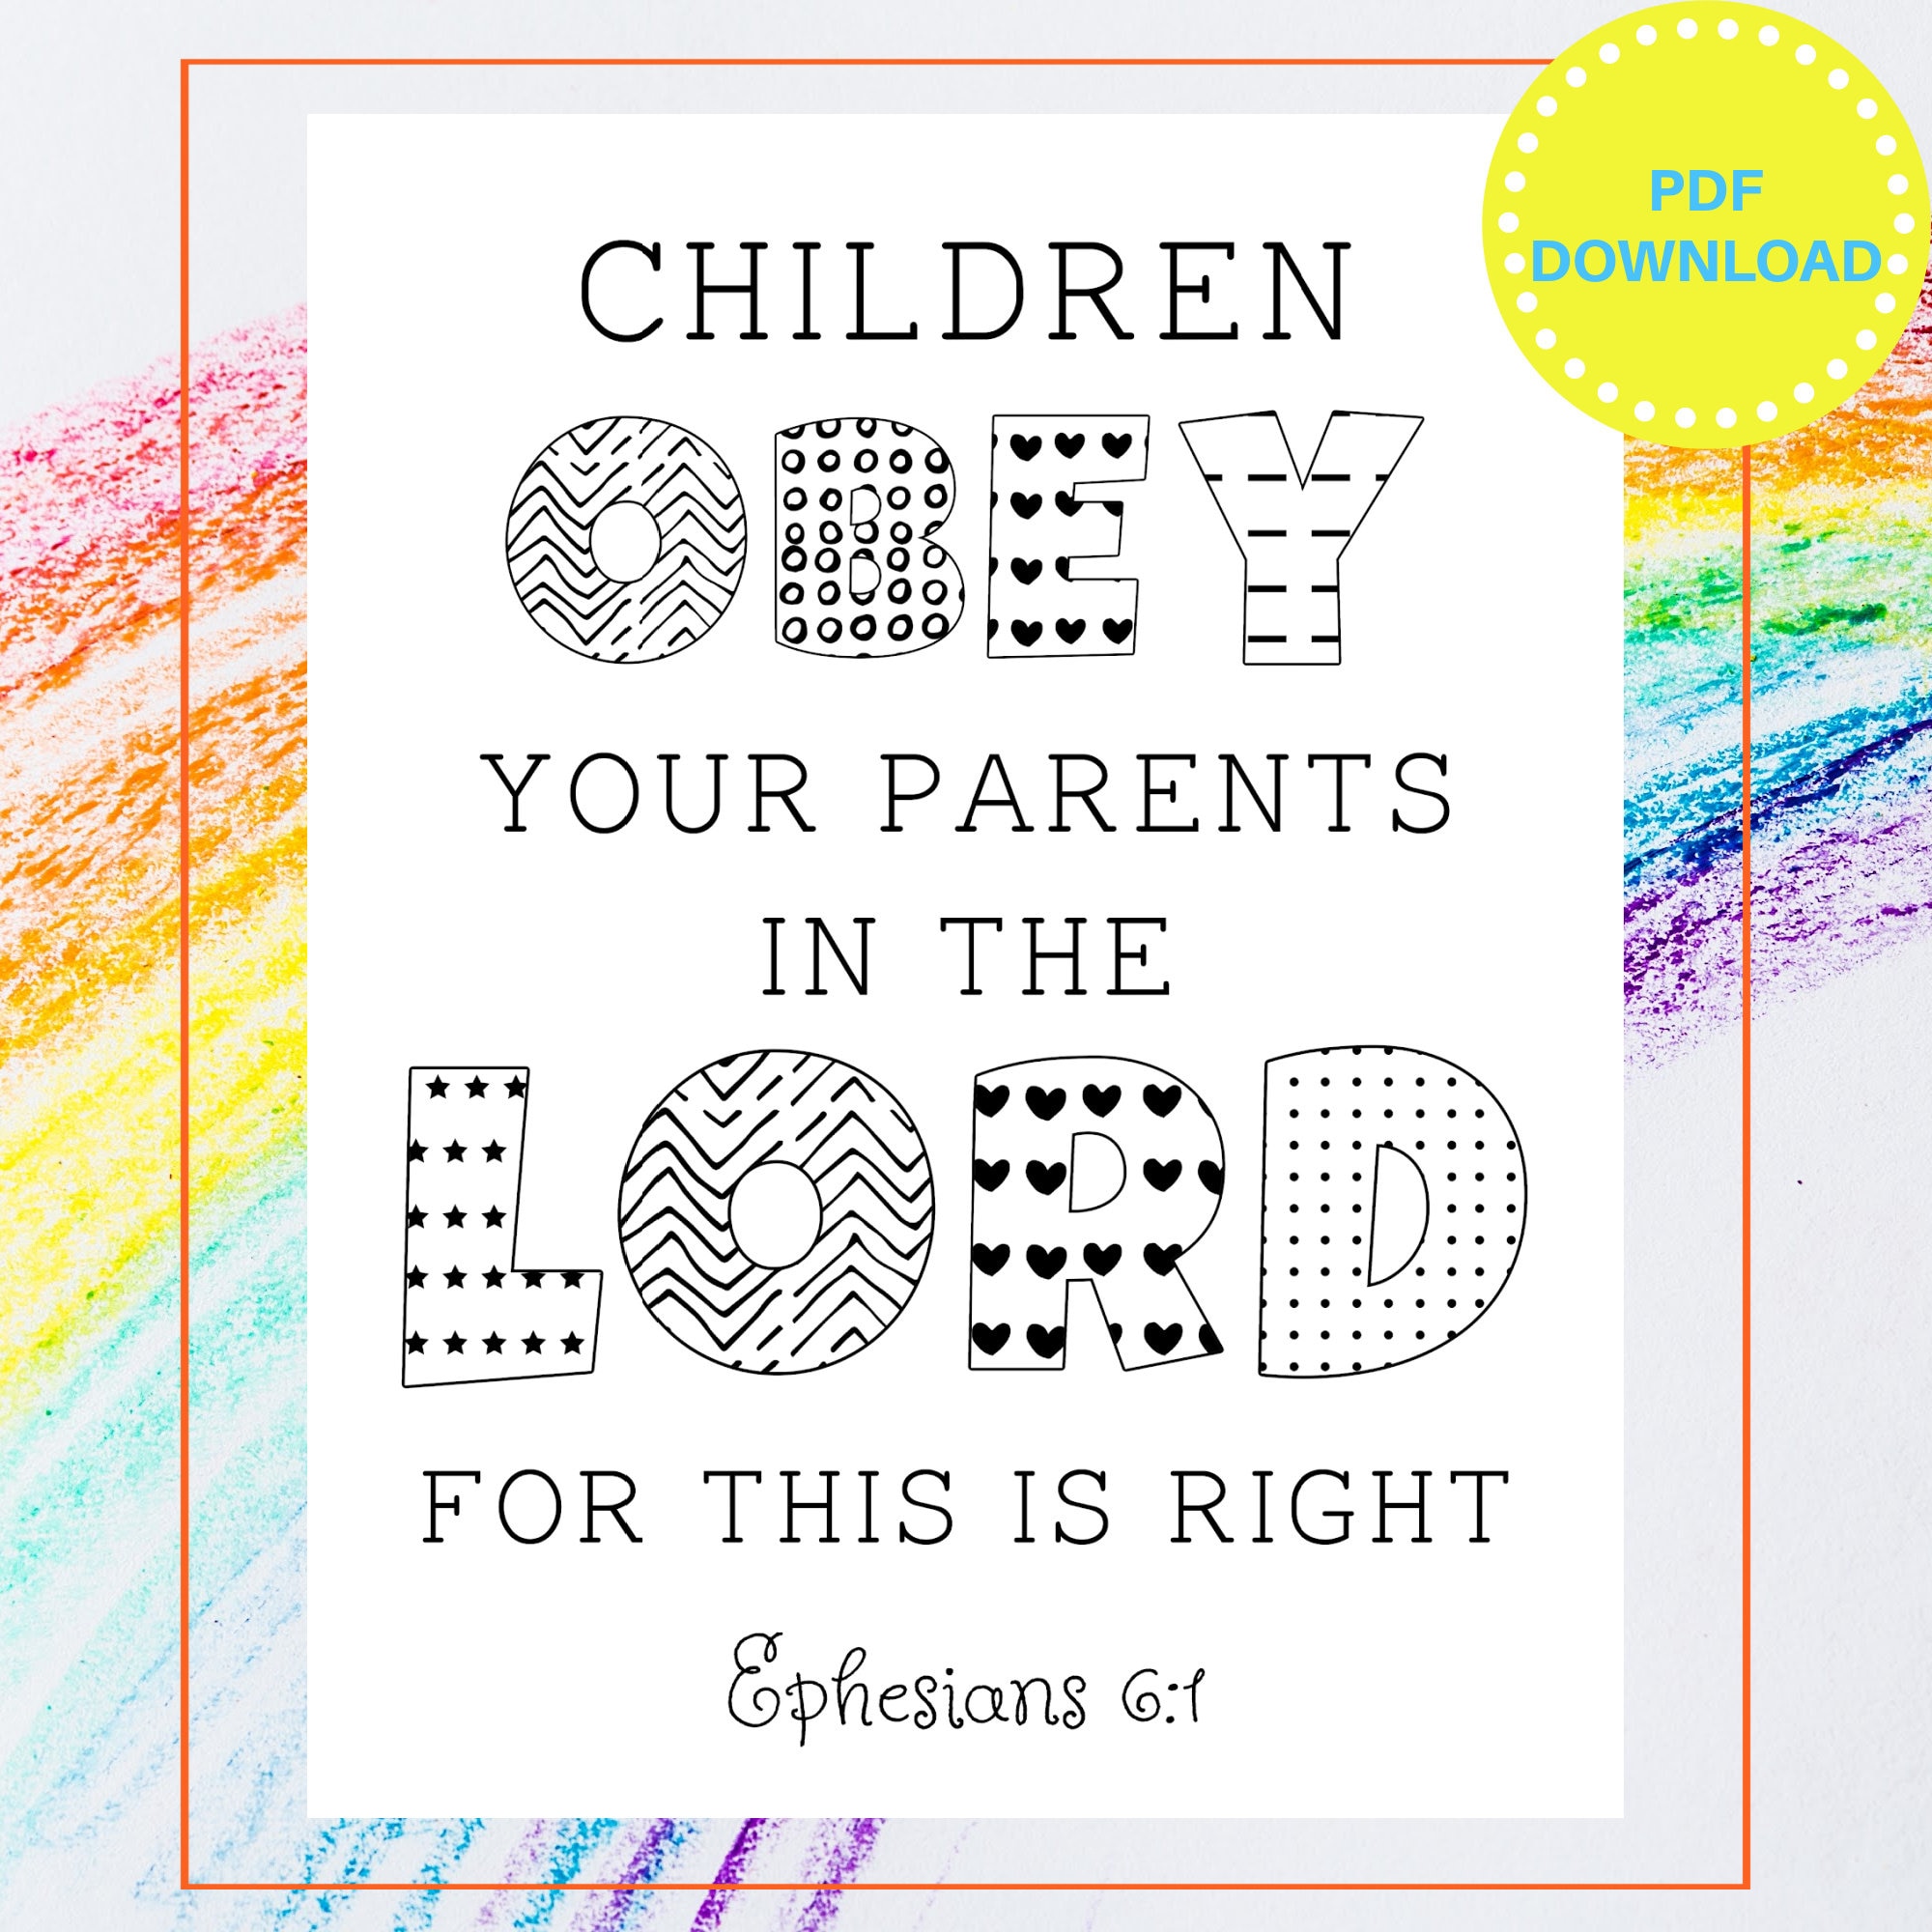 Printable bible verse coloring page ephesians children obey your parents in the lord sunday school homeschool christian kids